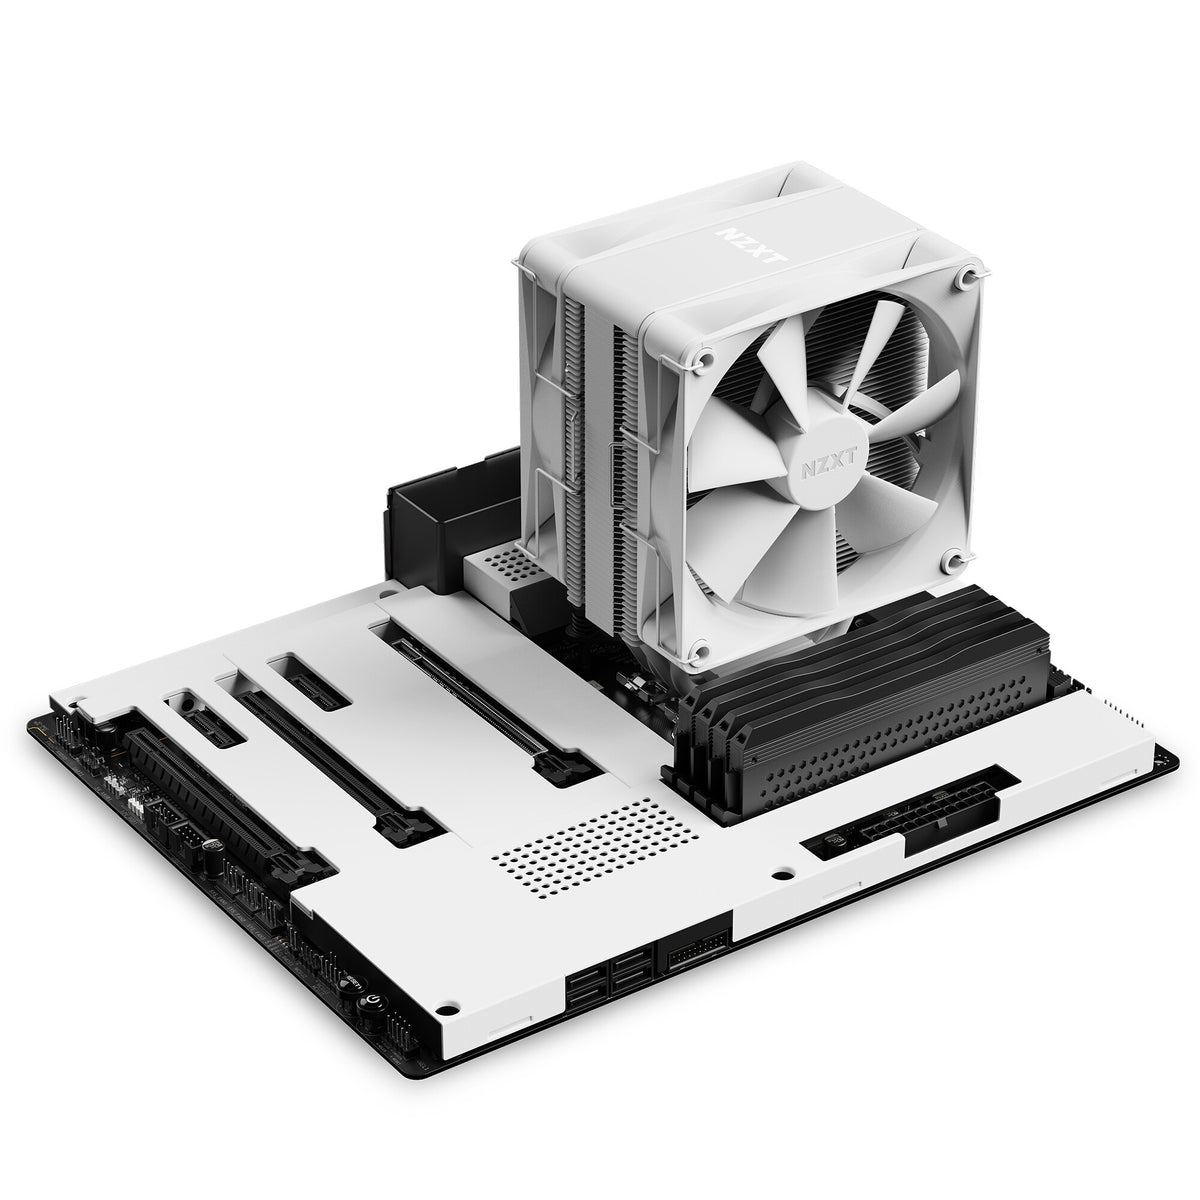 NZXT T120 - Air Processor Cooler in White - 120mm